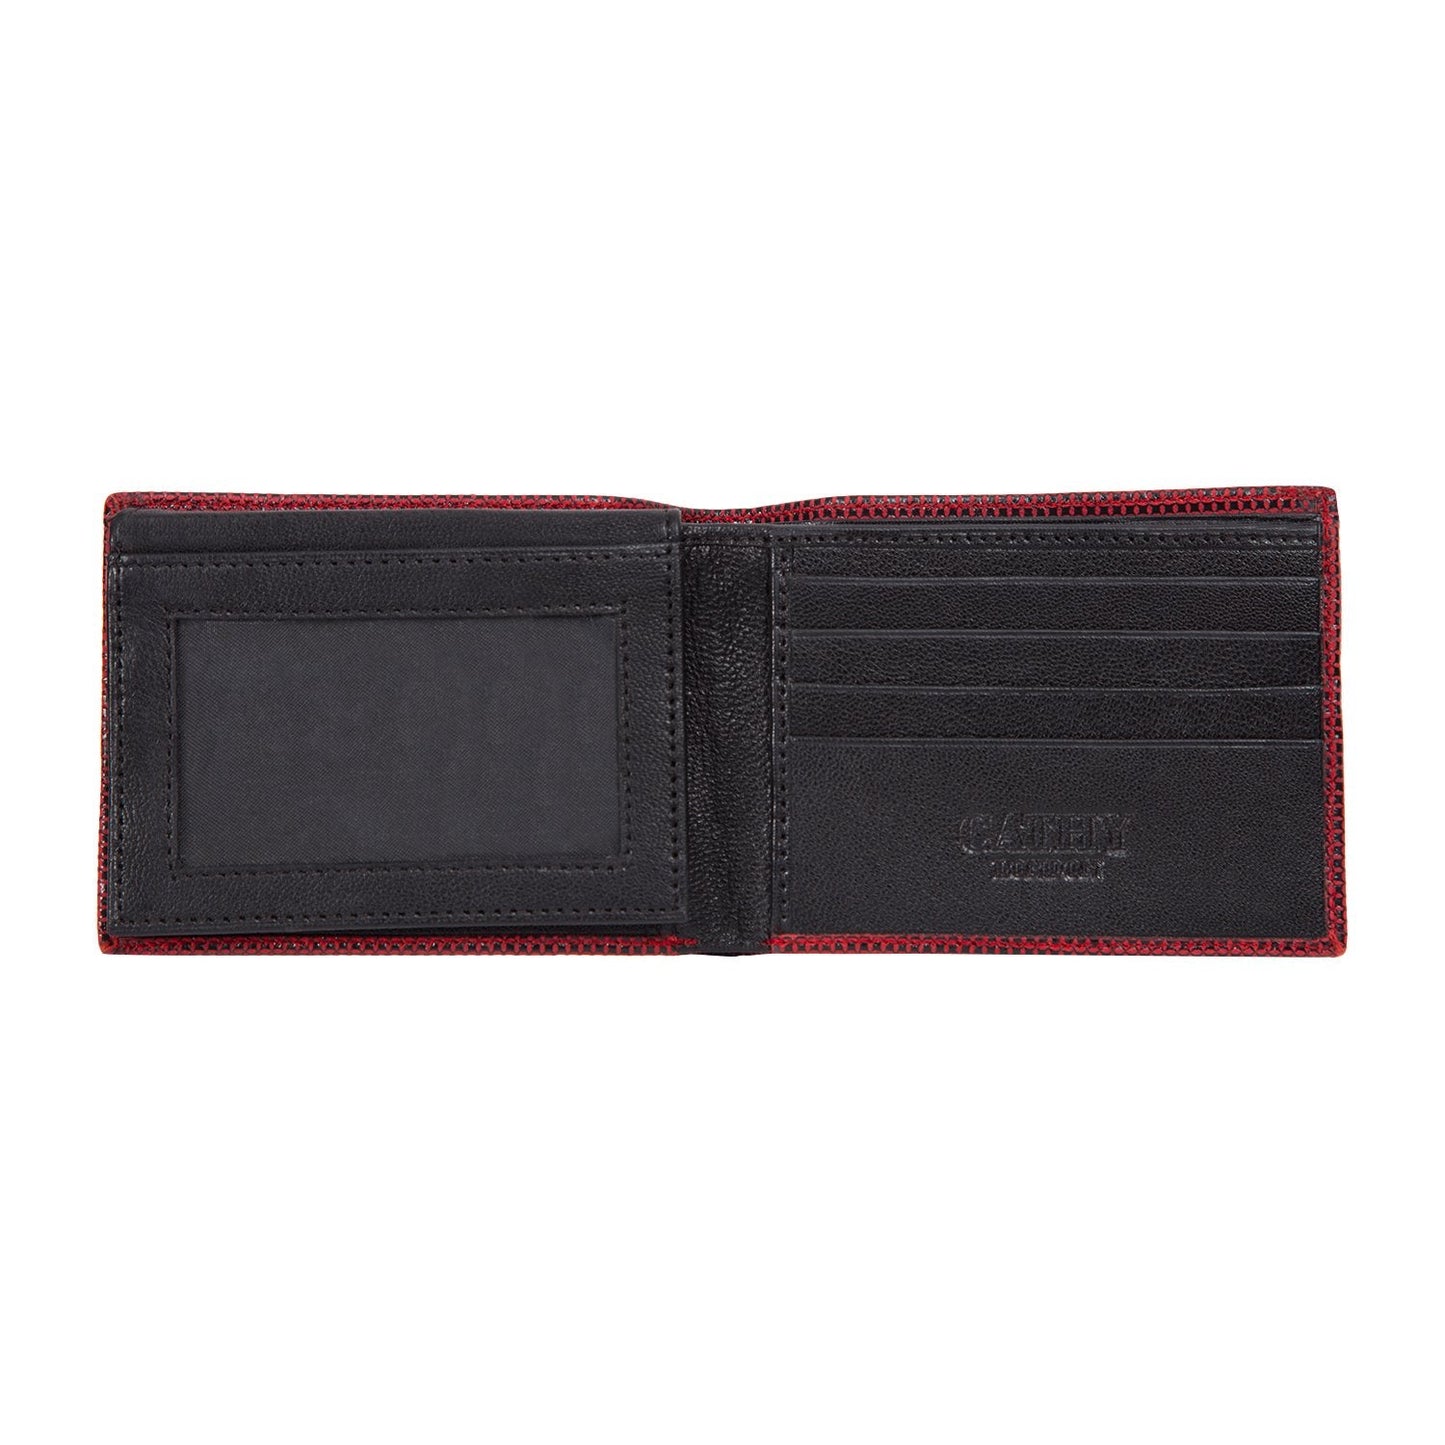 Cathy London Limited Edition RFID Men's Wallet 8 Card Slots